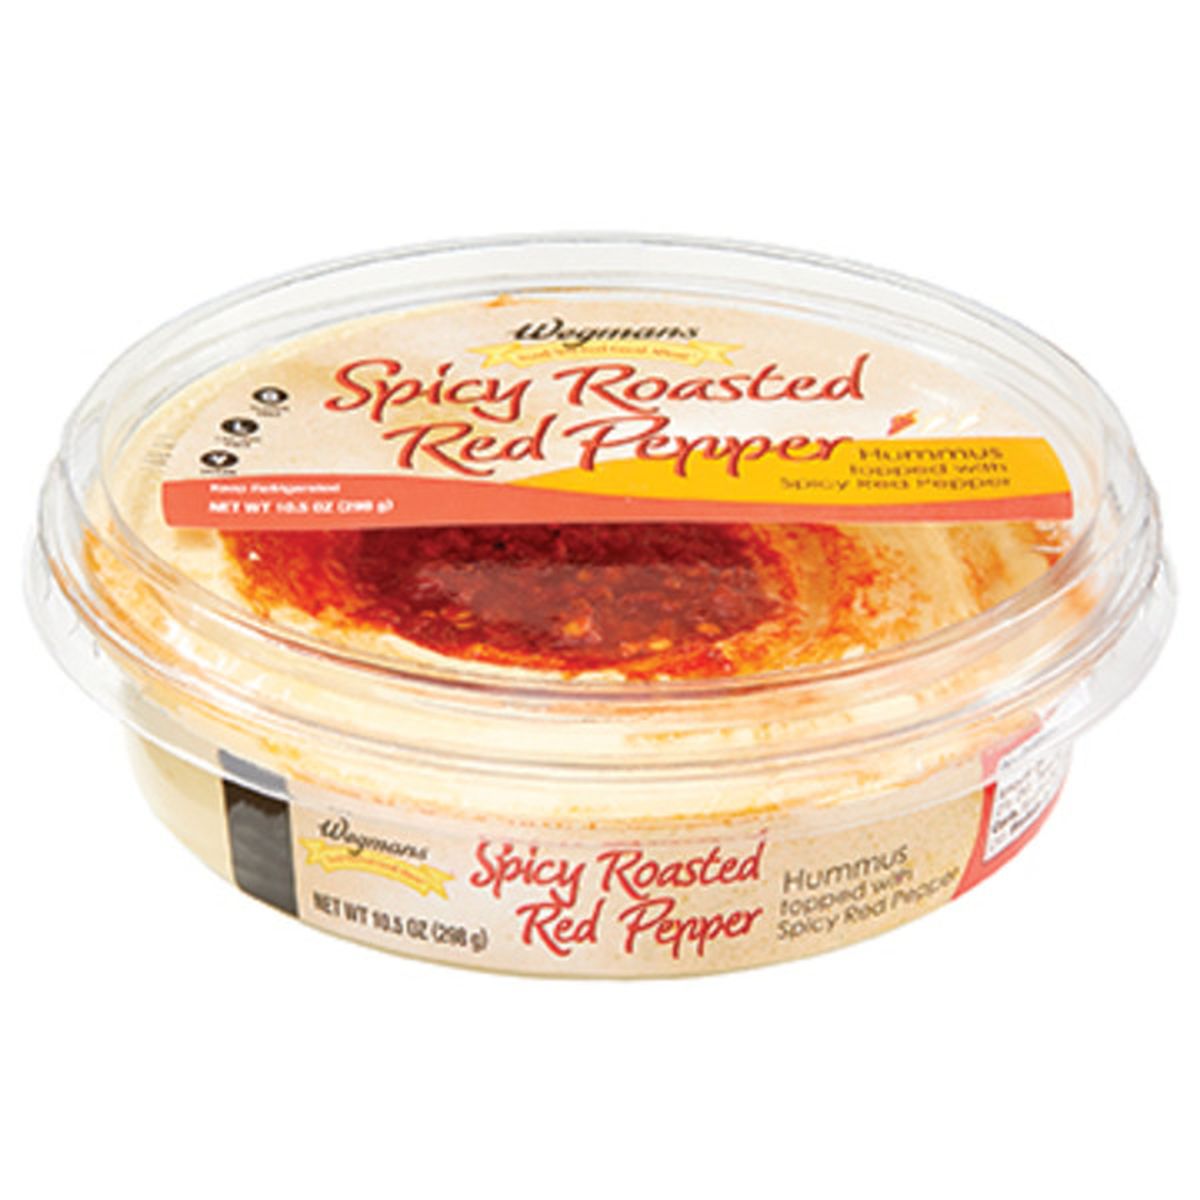 Calories in Wegmans Original Hummus Topped with Spicy Roasted Red Pepper